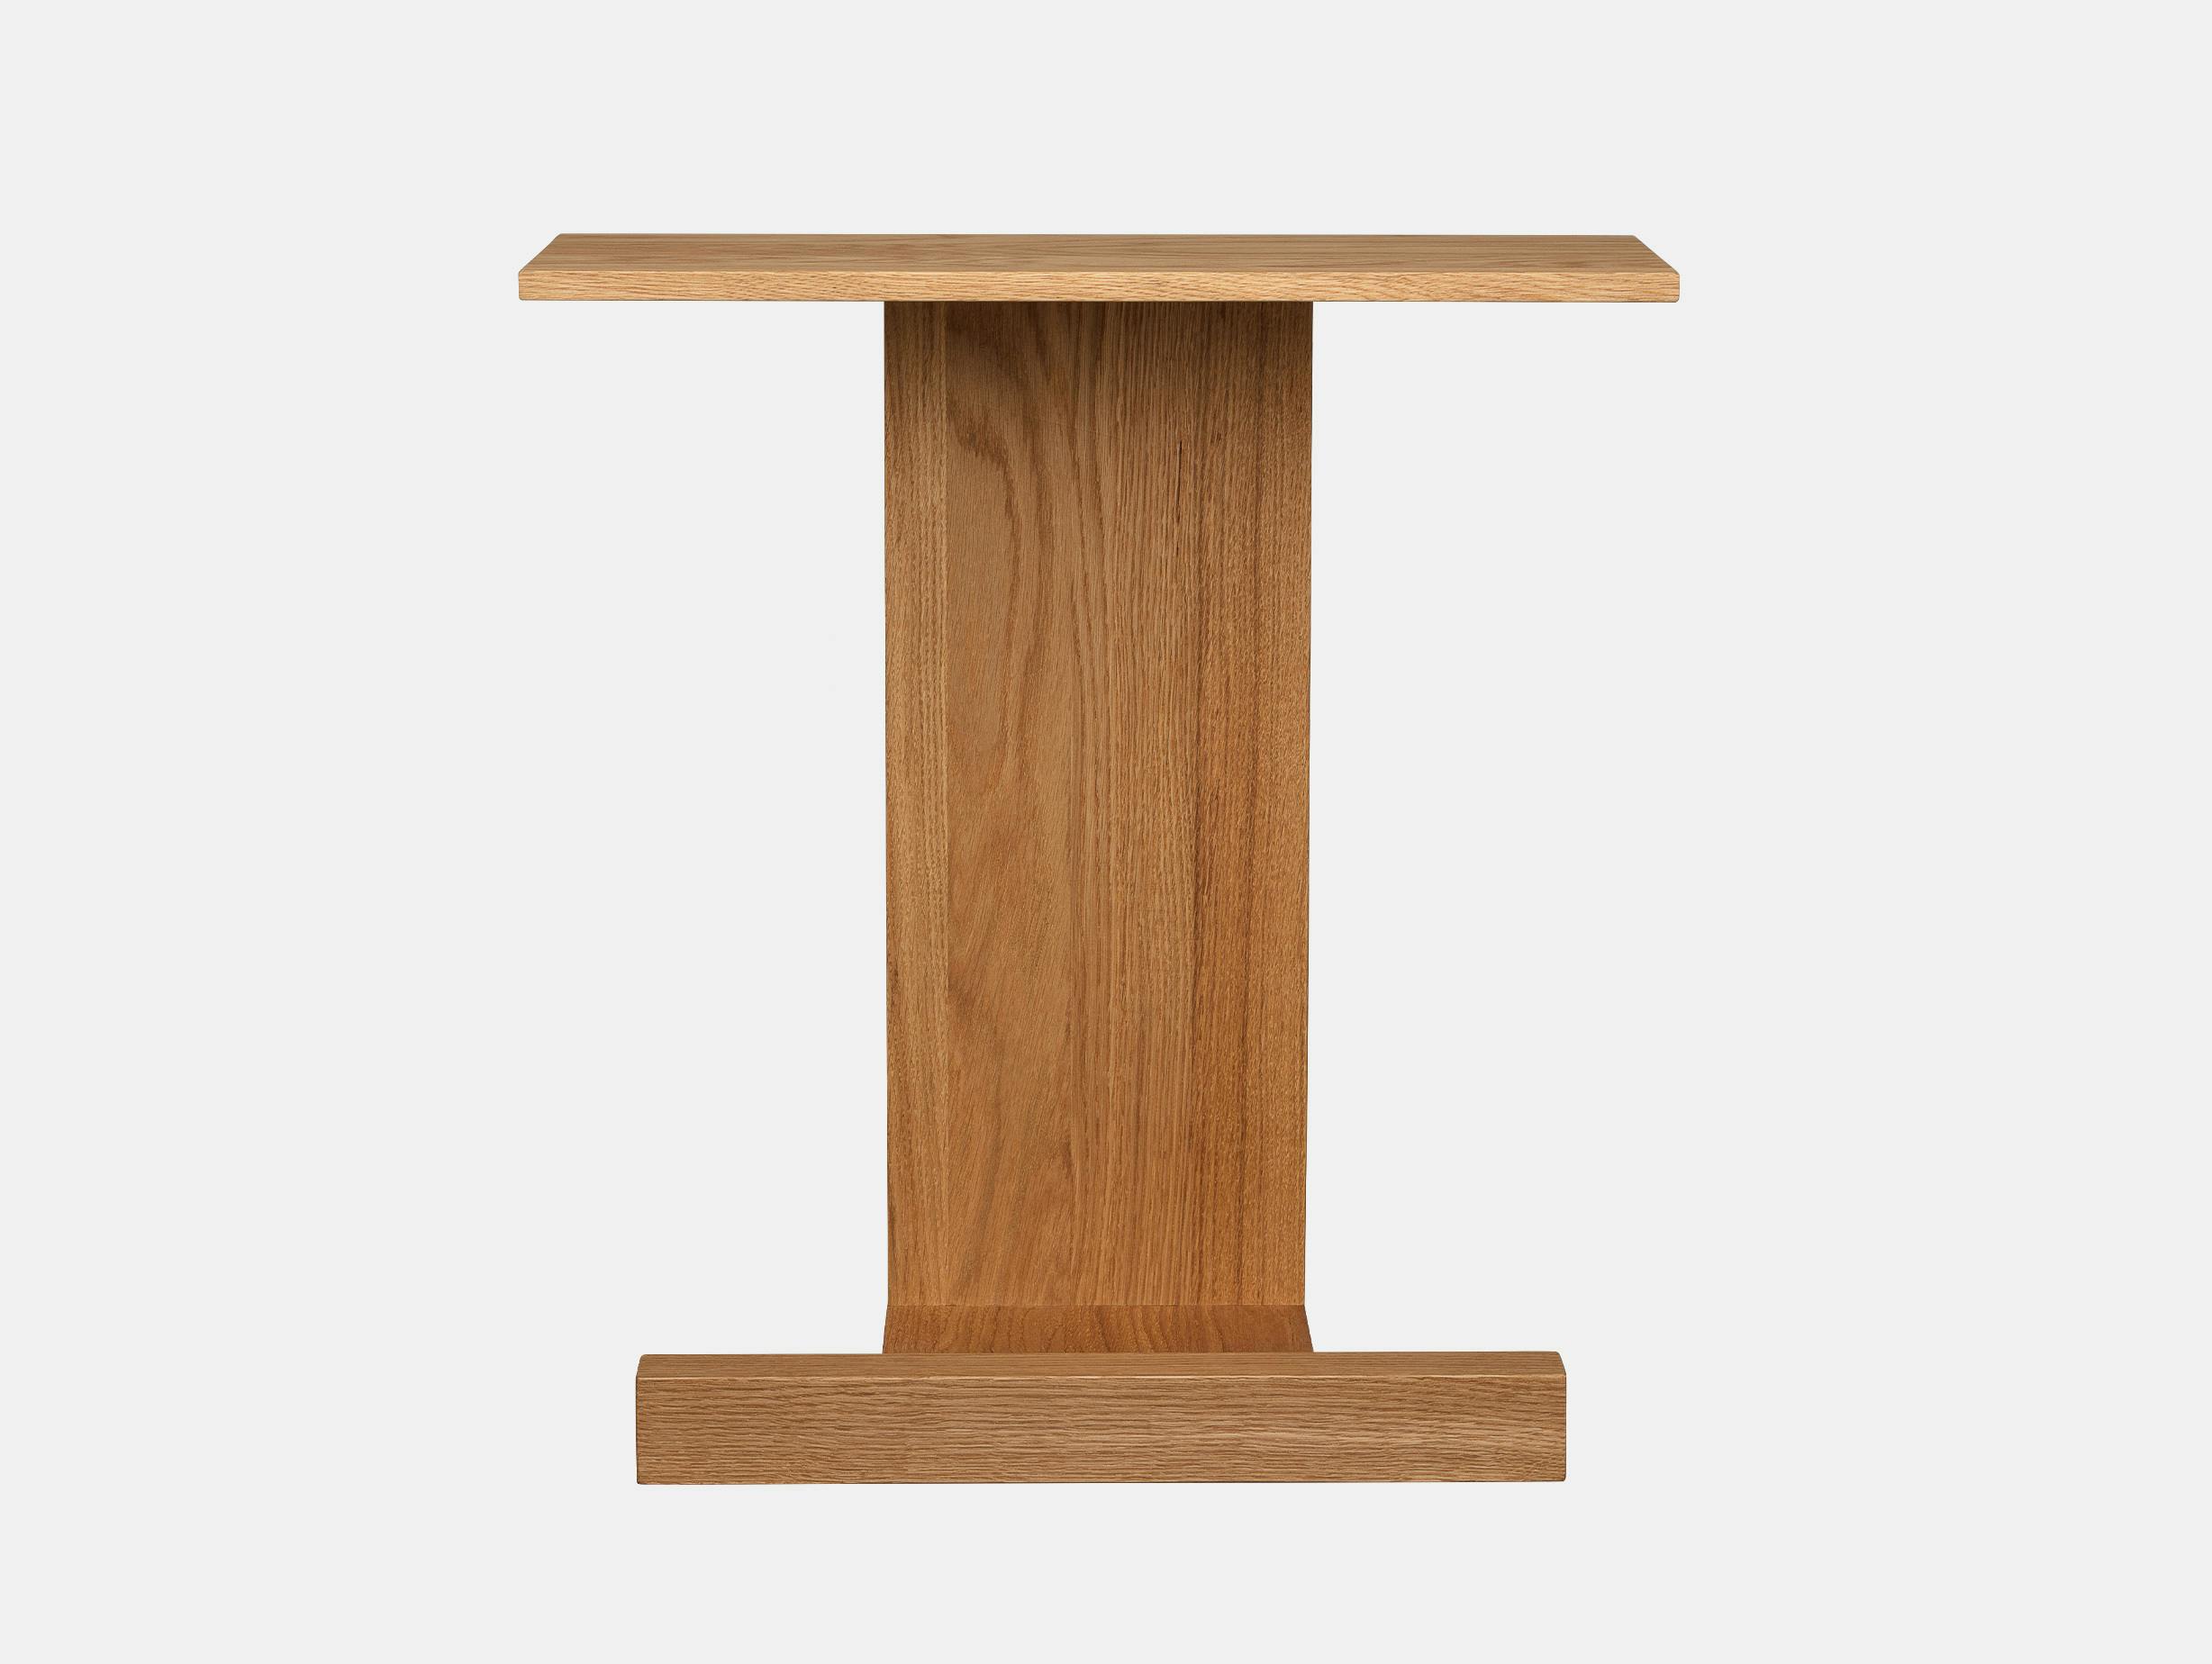 Fogia supersolid object 4 oak 2